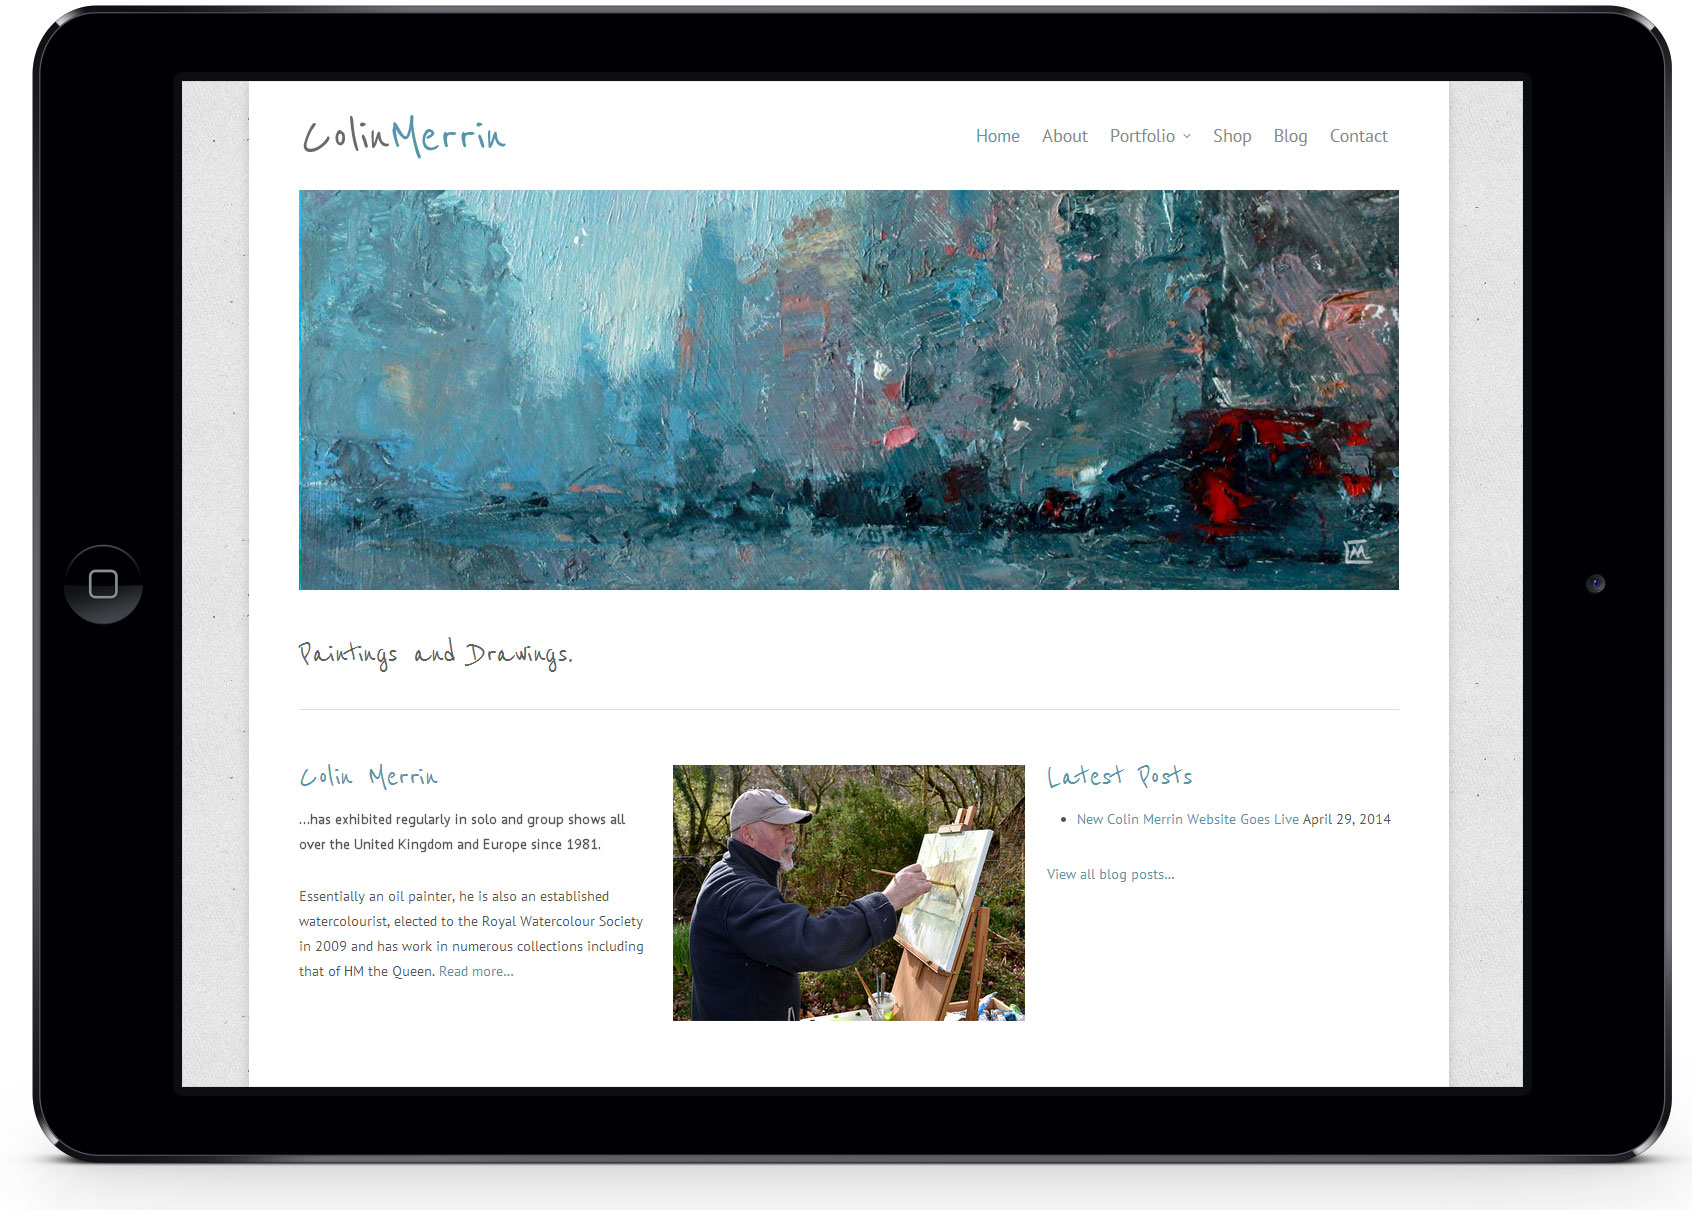 New Colin Merrin Website Goes Live